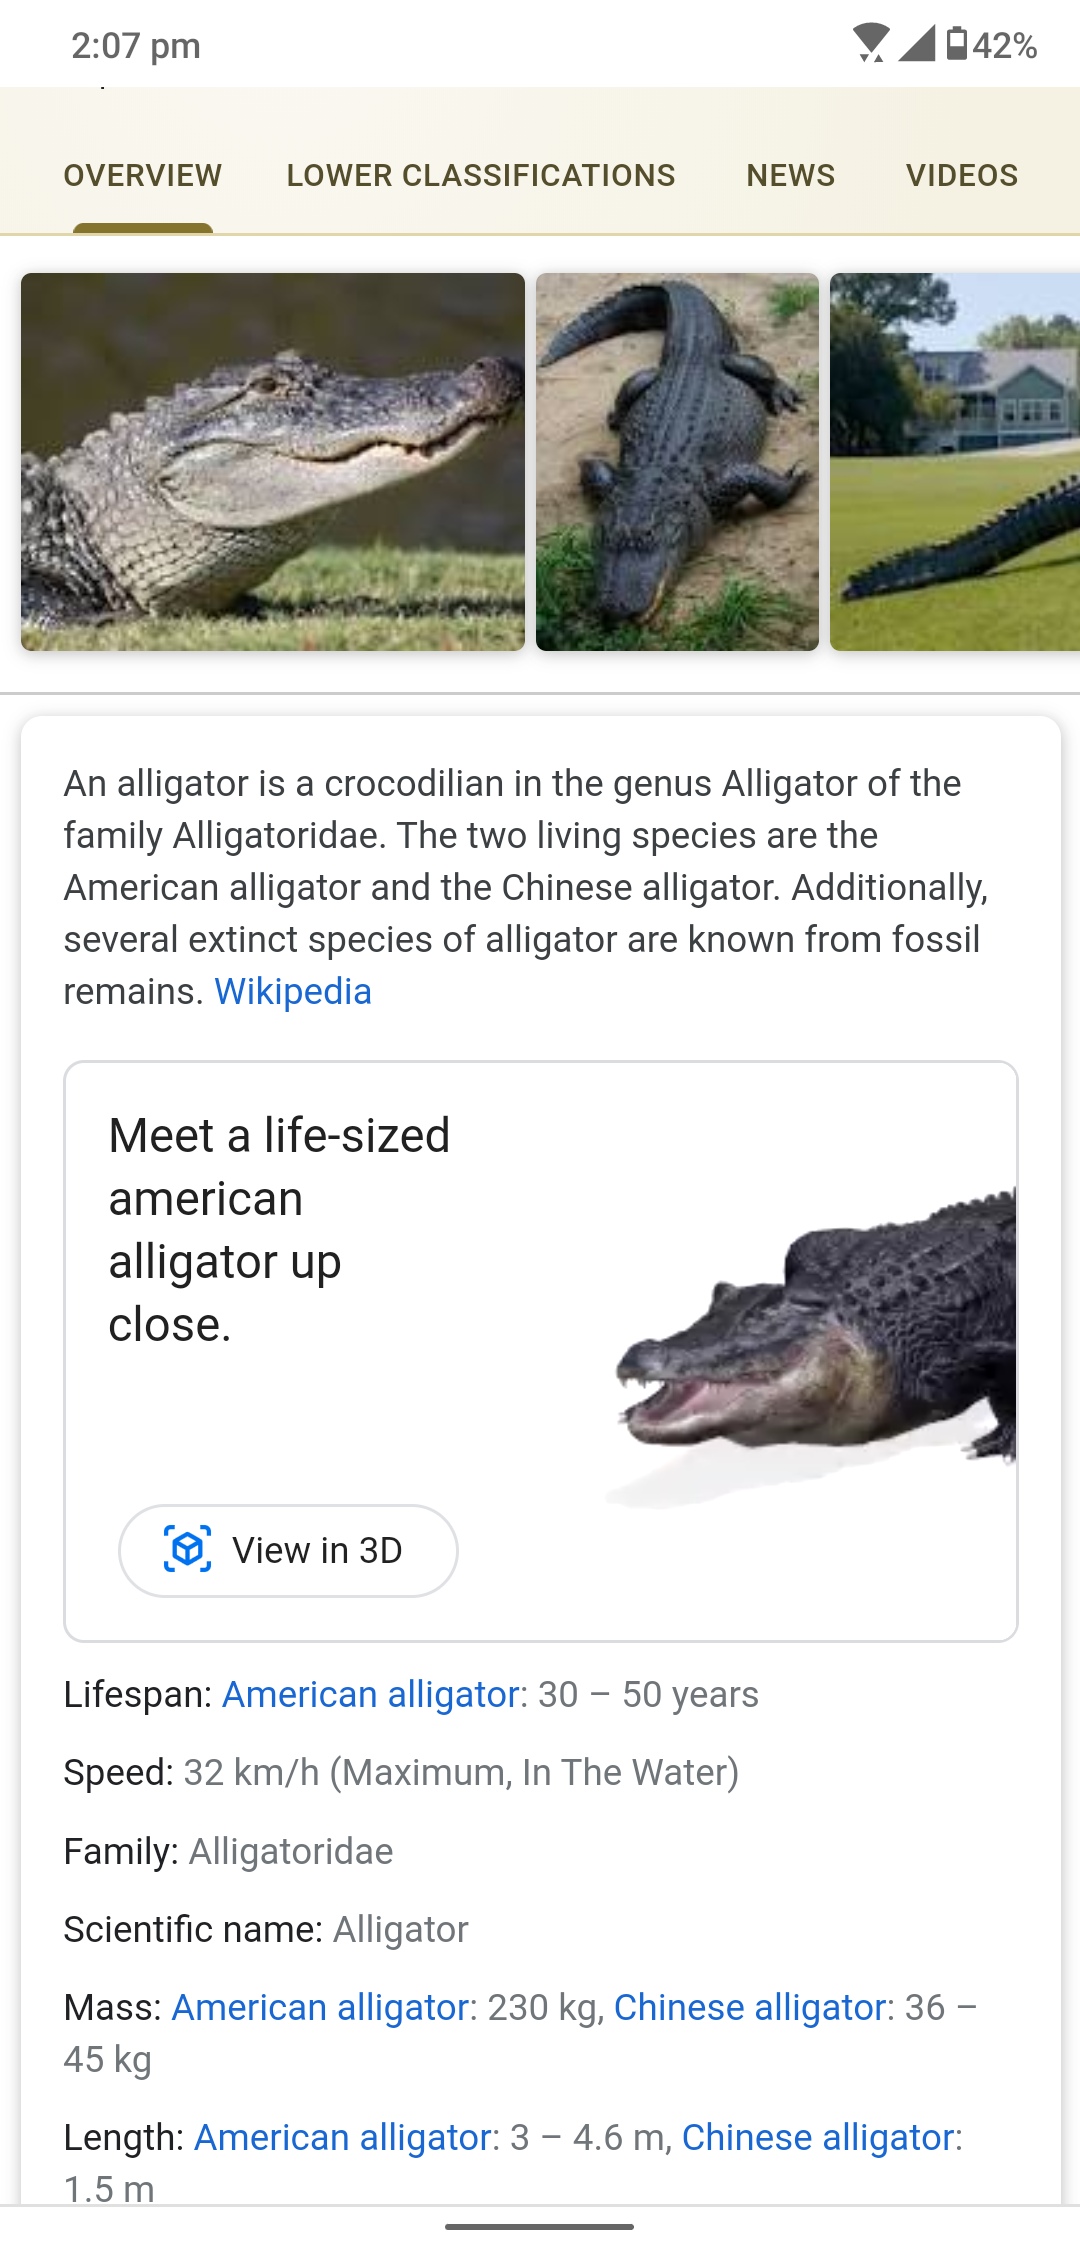 How to View 3D Animals in AR on Your Phone Using Google Search